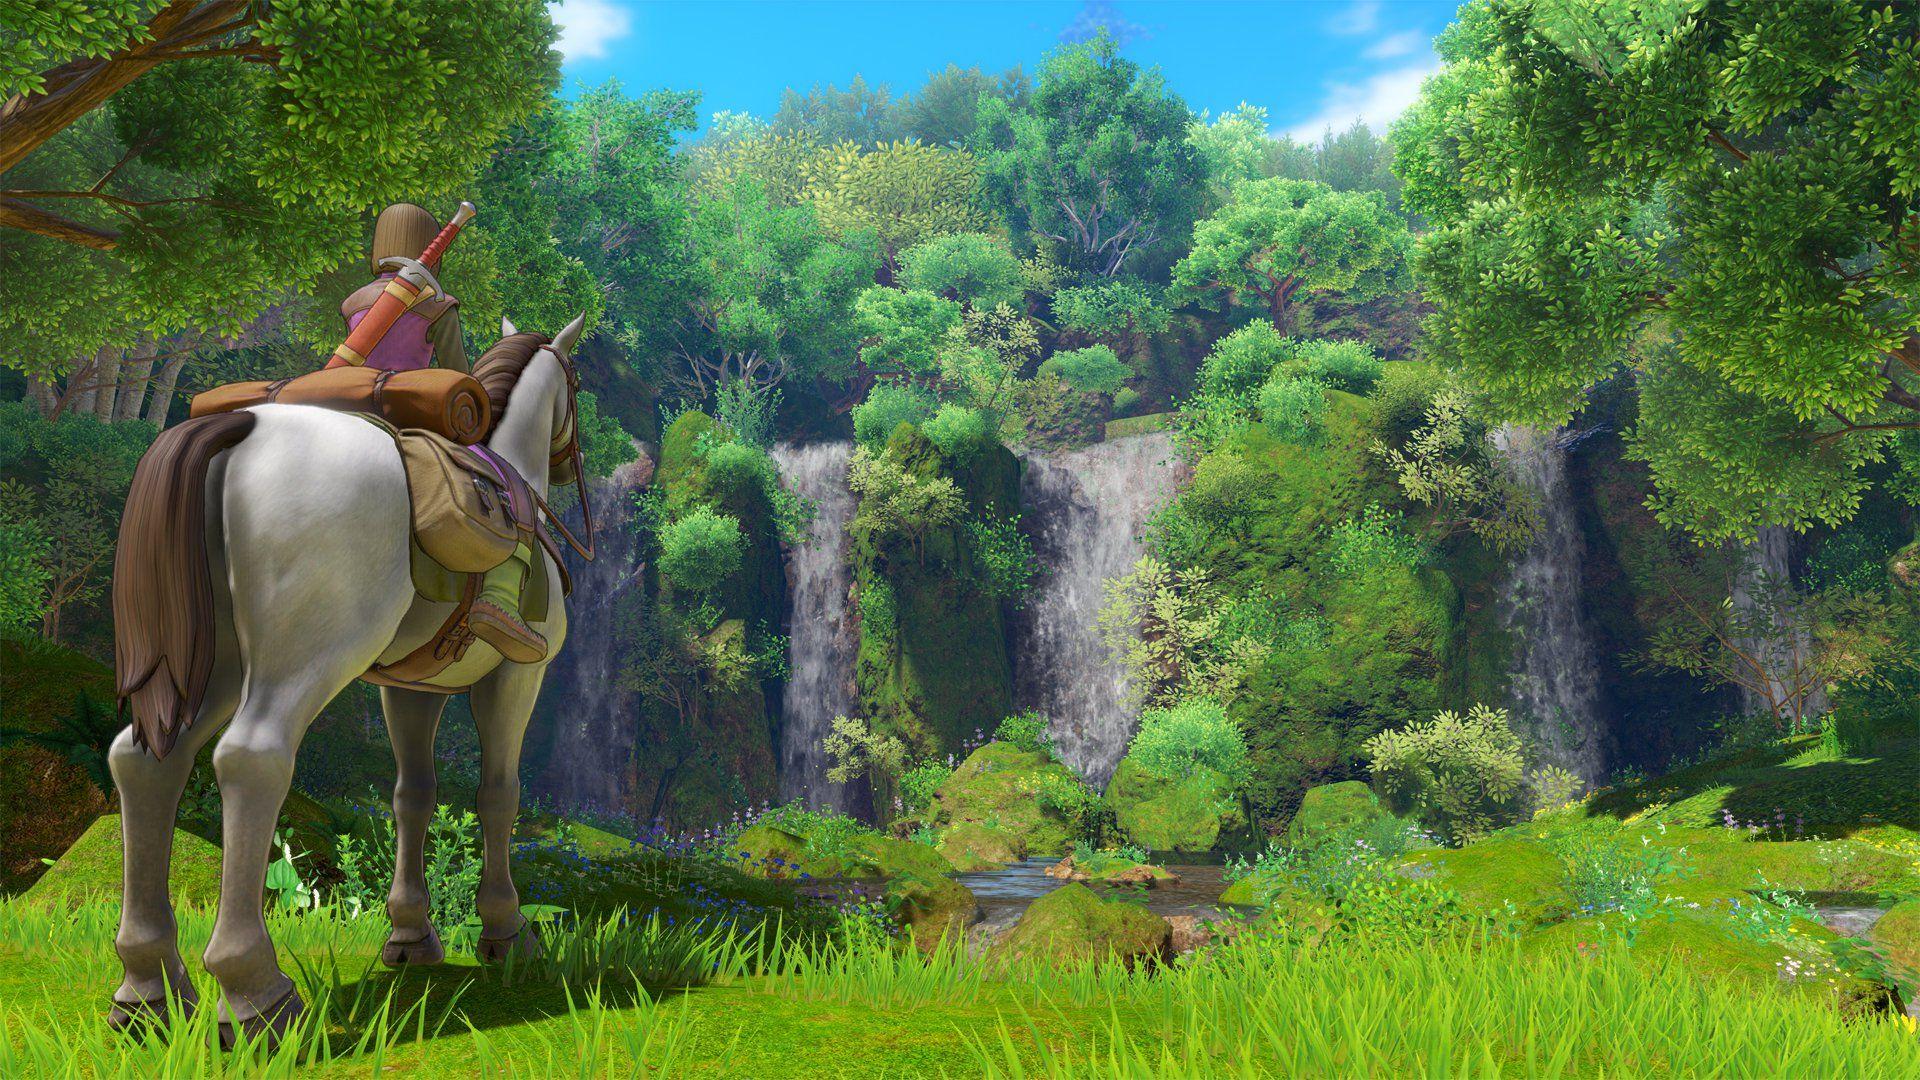 Review: Dragon Quest XI: Echoes of an Elusive Age